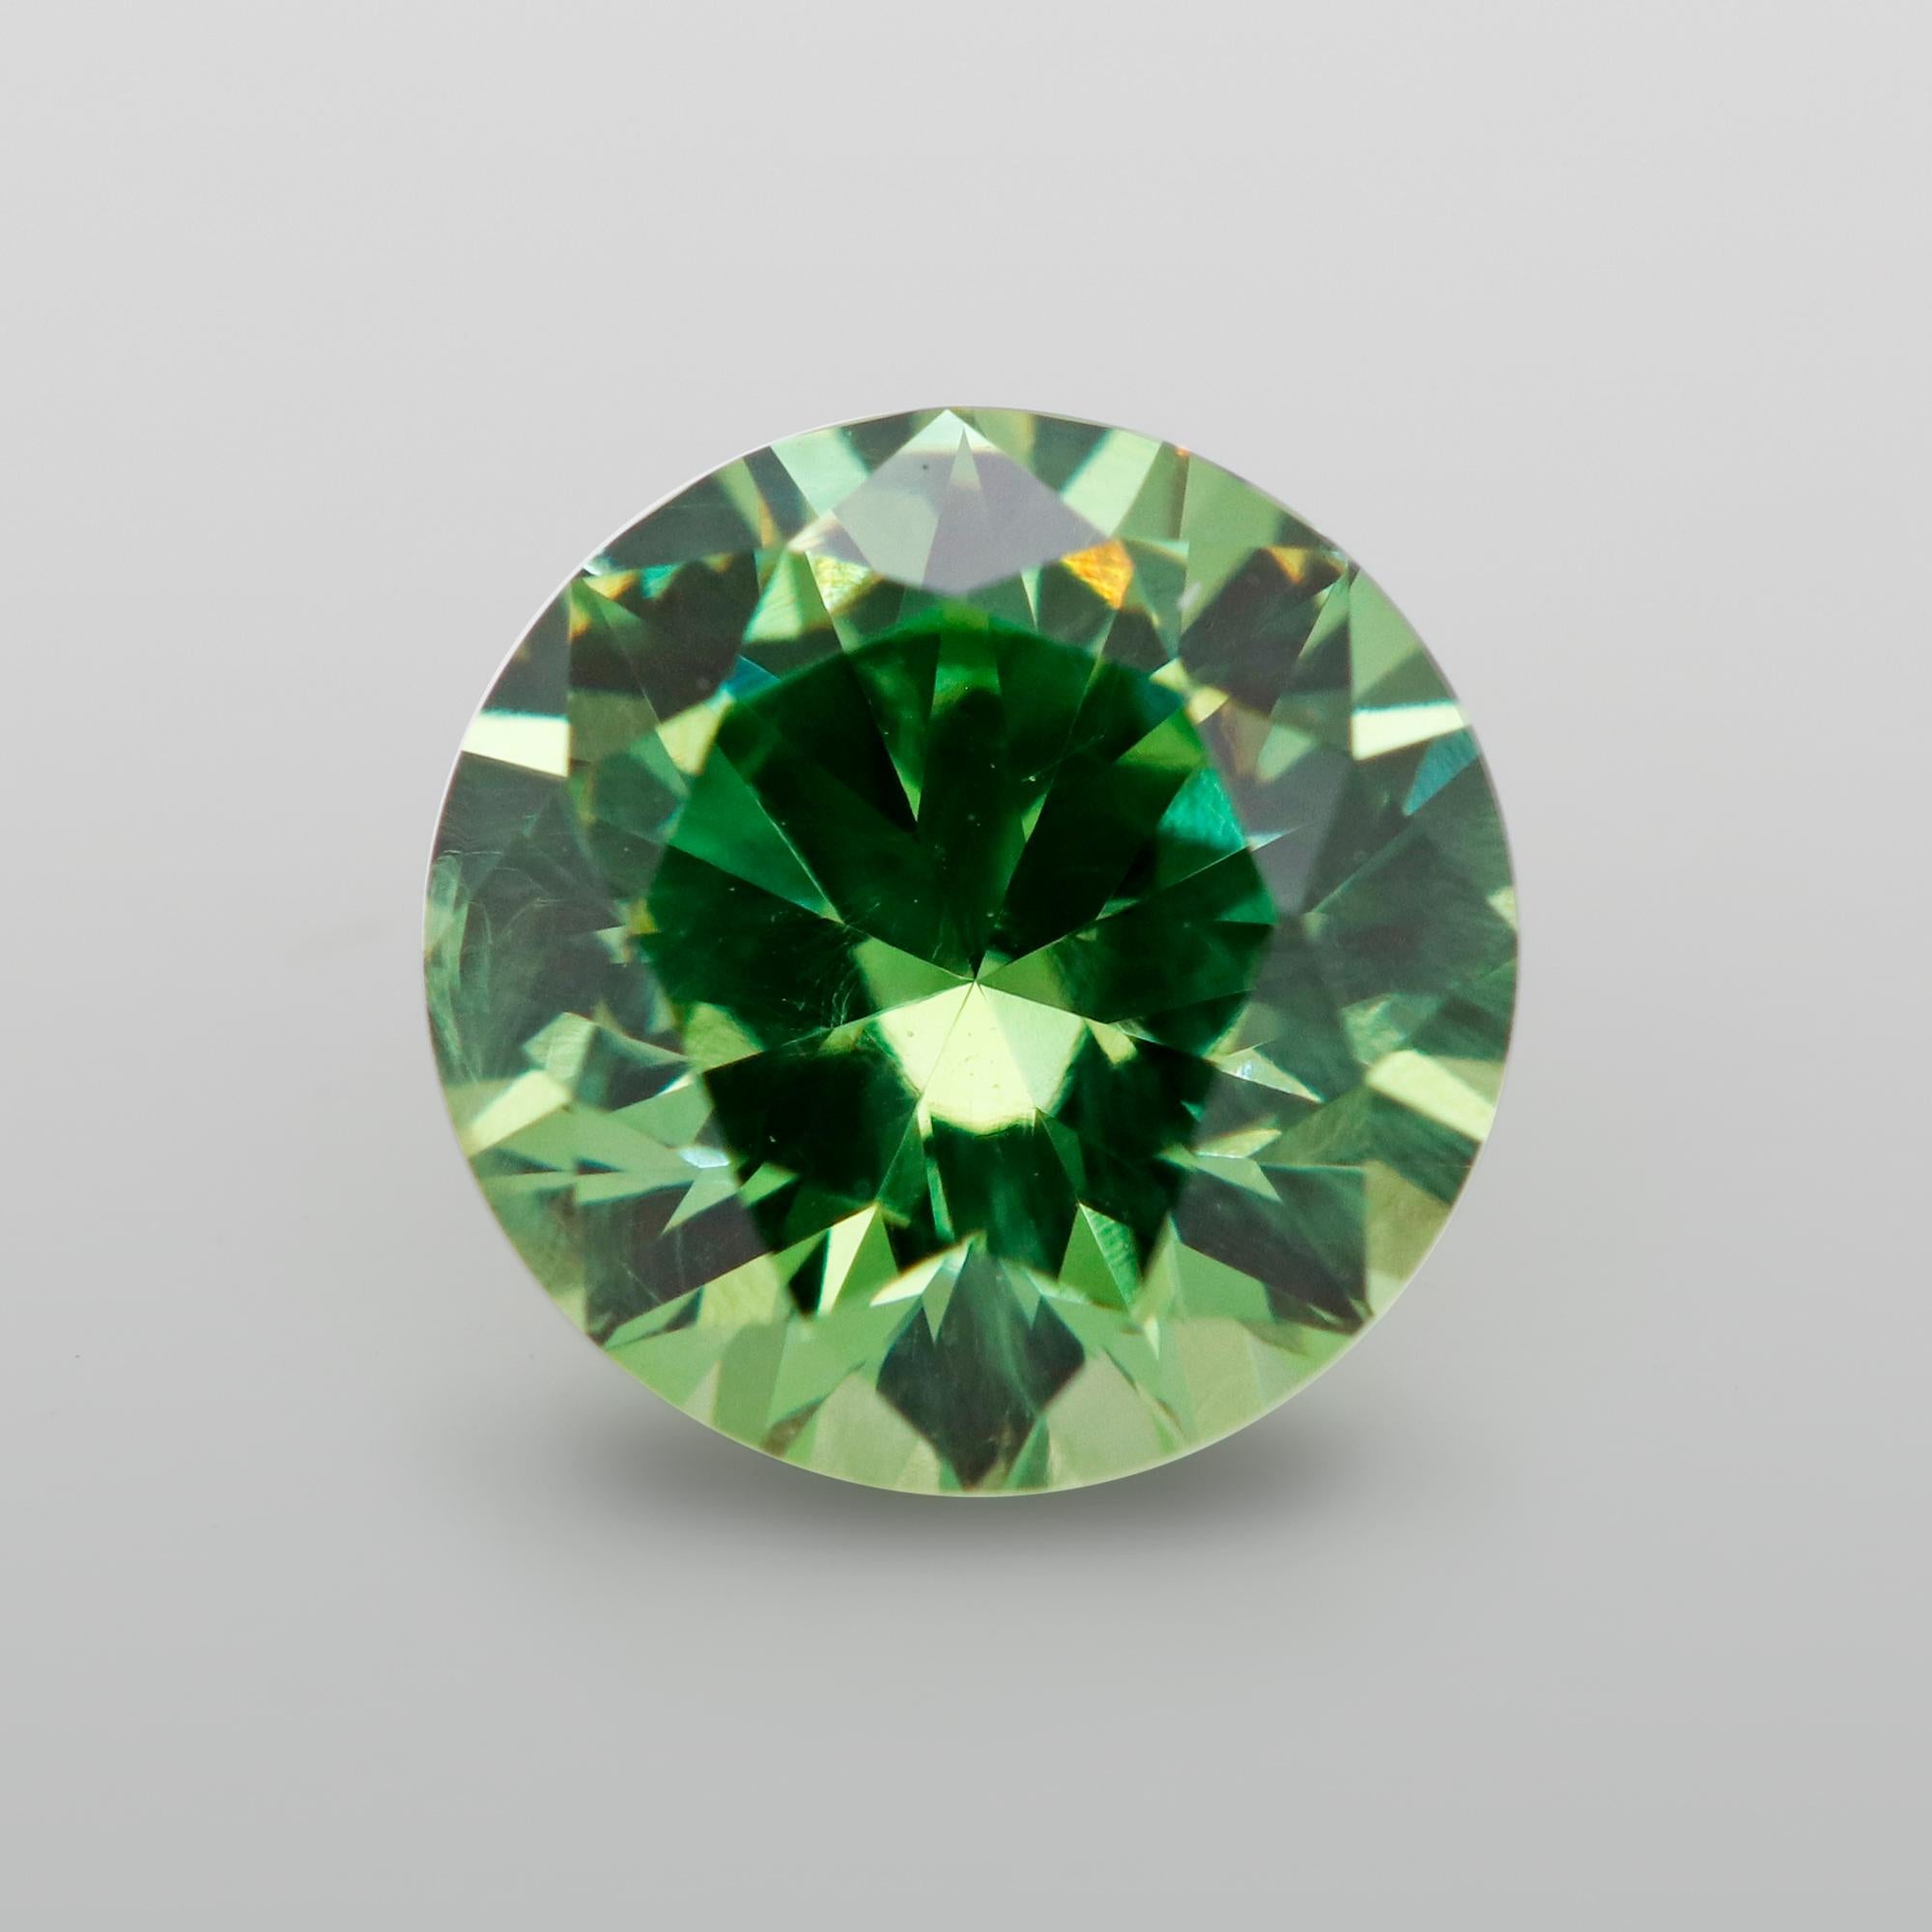 Demantoid garnet was first discovered in the Ural Mountains of Russia. This gemstone found its appreciation around the world because of its unique inclusion called 